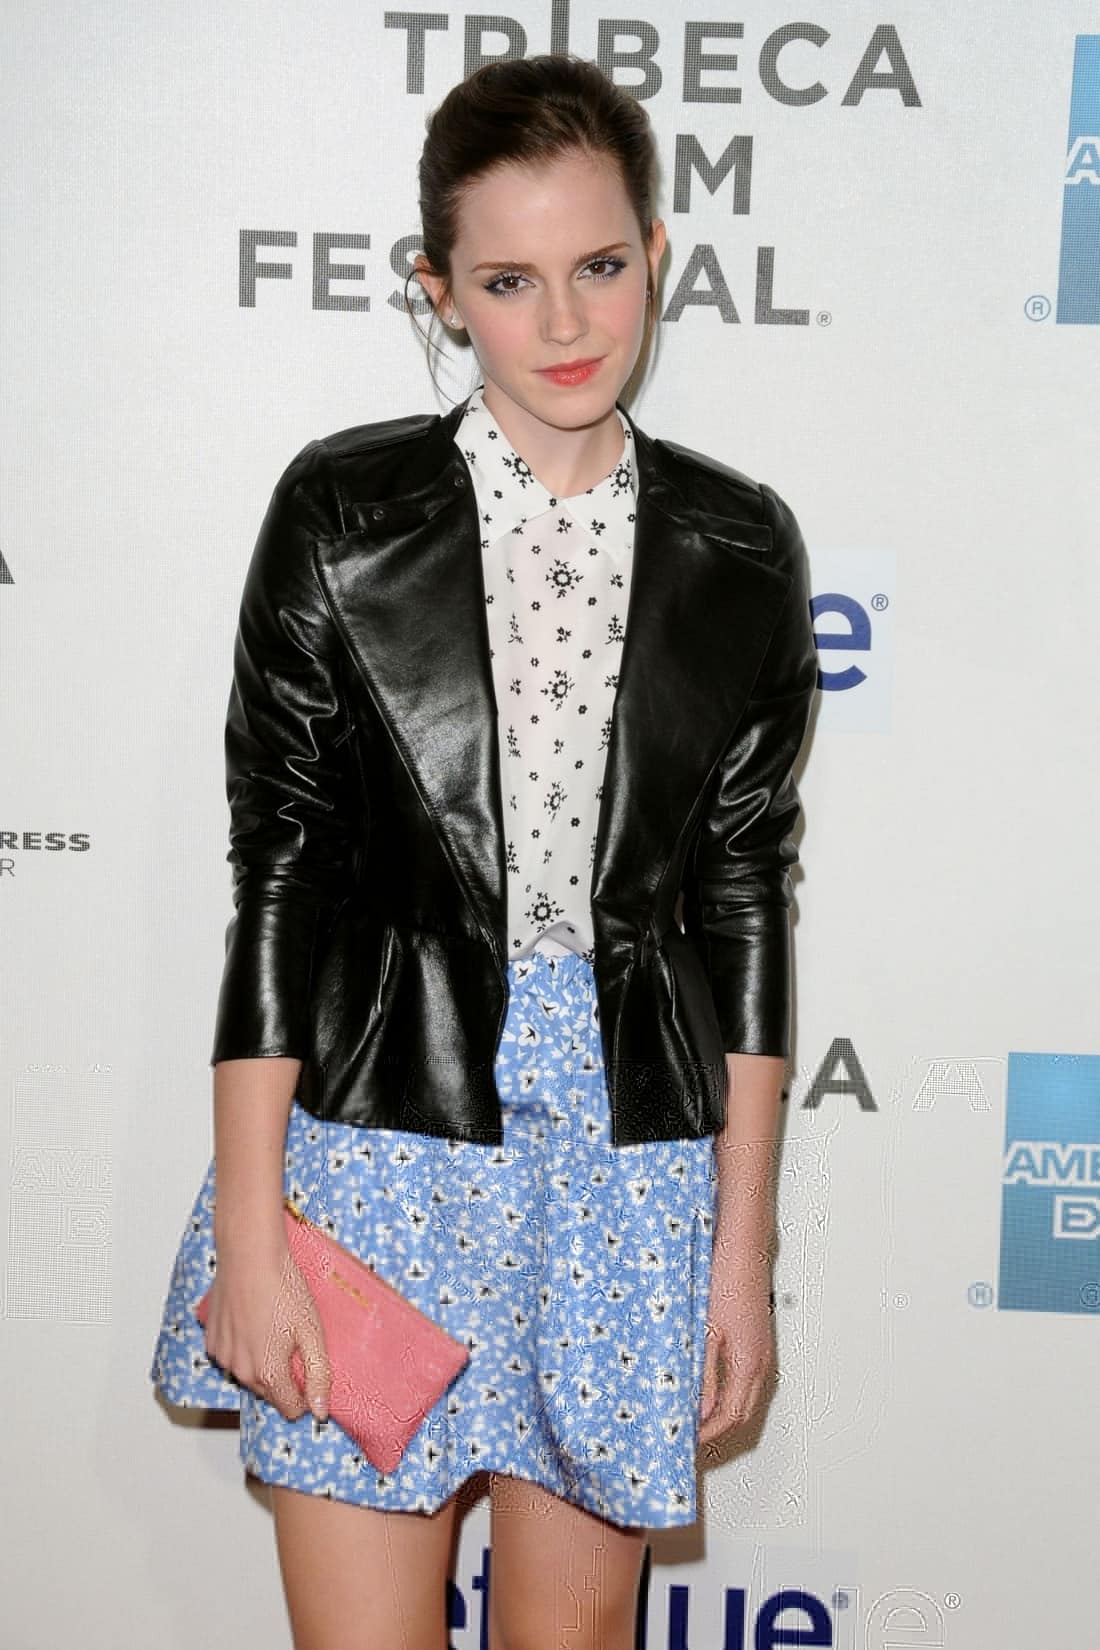 Emma Watson Wore a Daring Blue Skirt at the "Struck By Lightning" Premiere